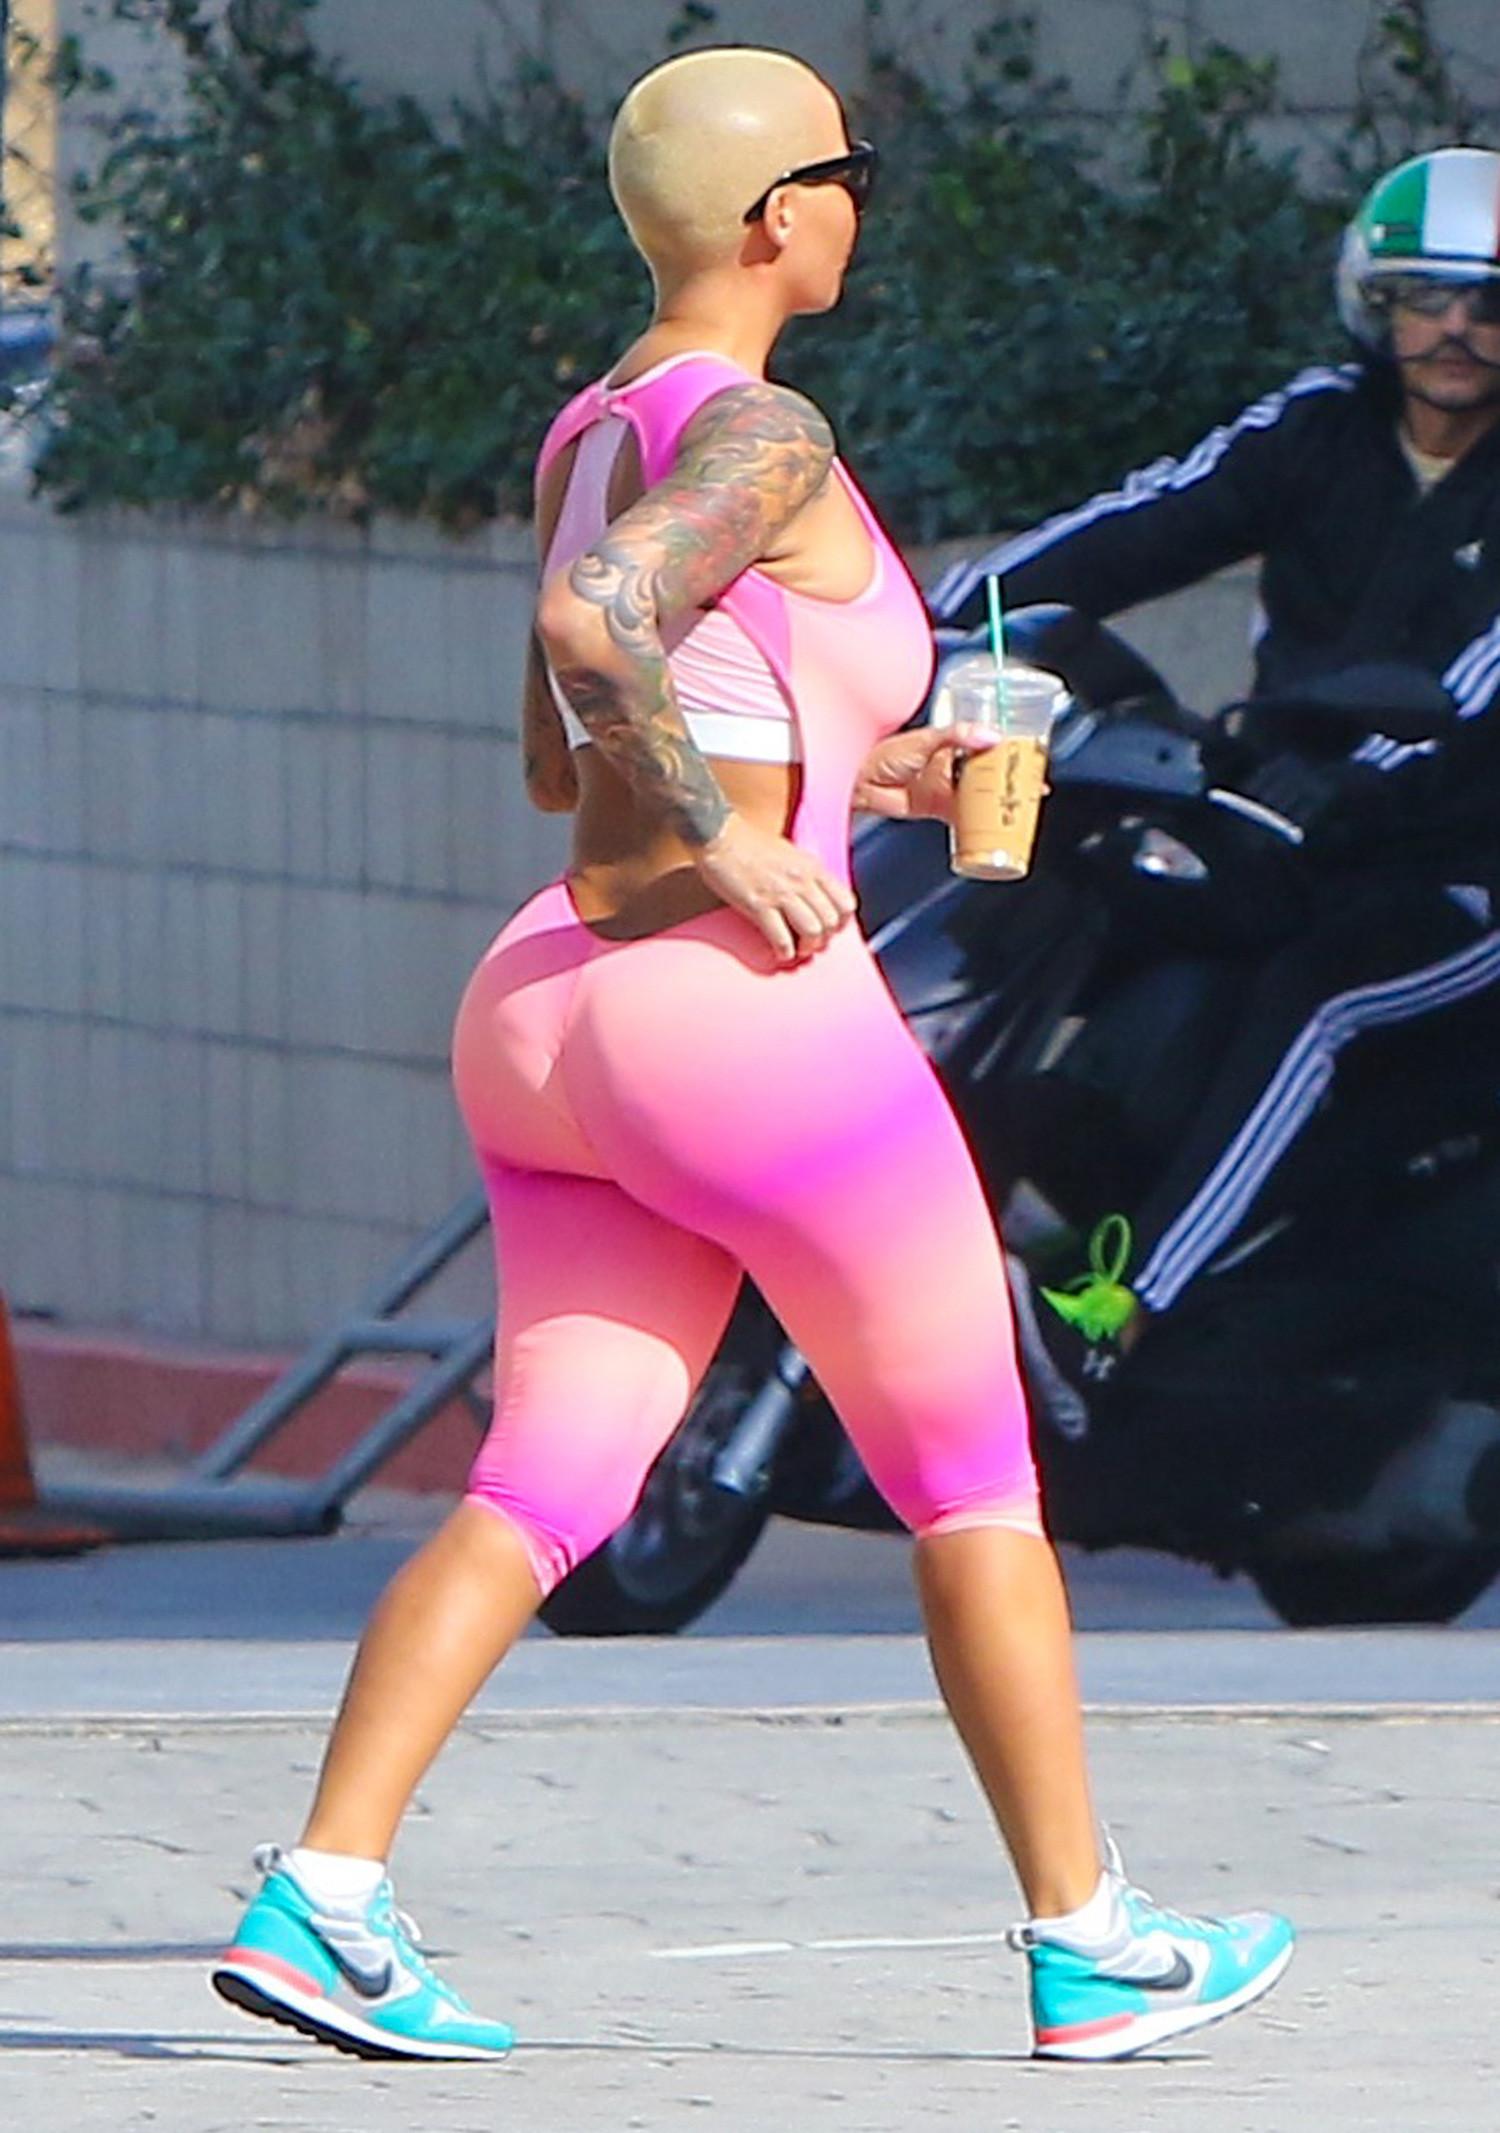 75+ Hottest Amber Rose Pictures That Will Drive You Nuts | Best Of Comic Books